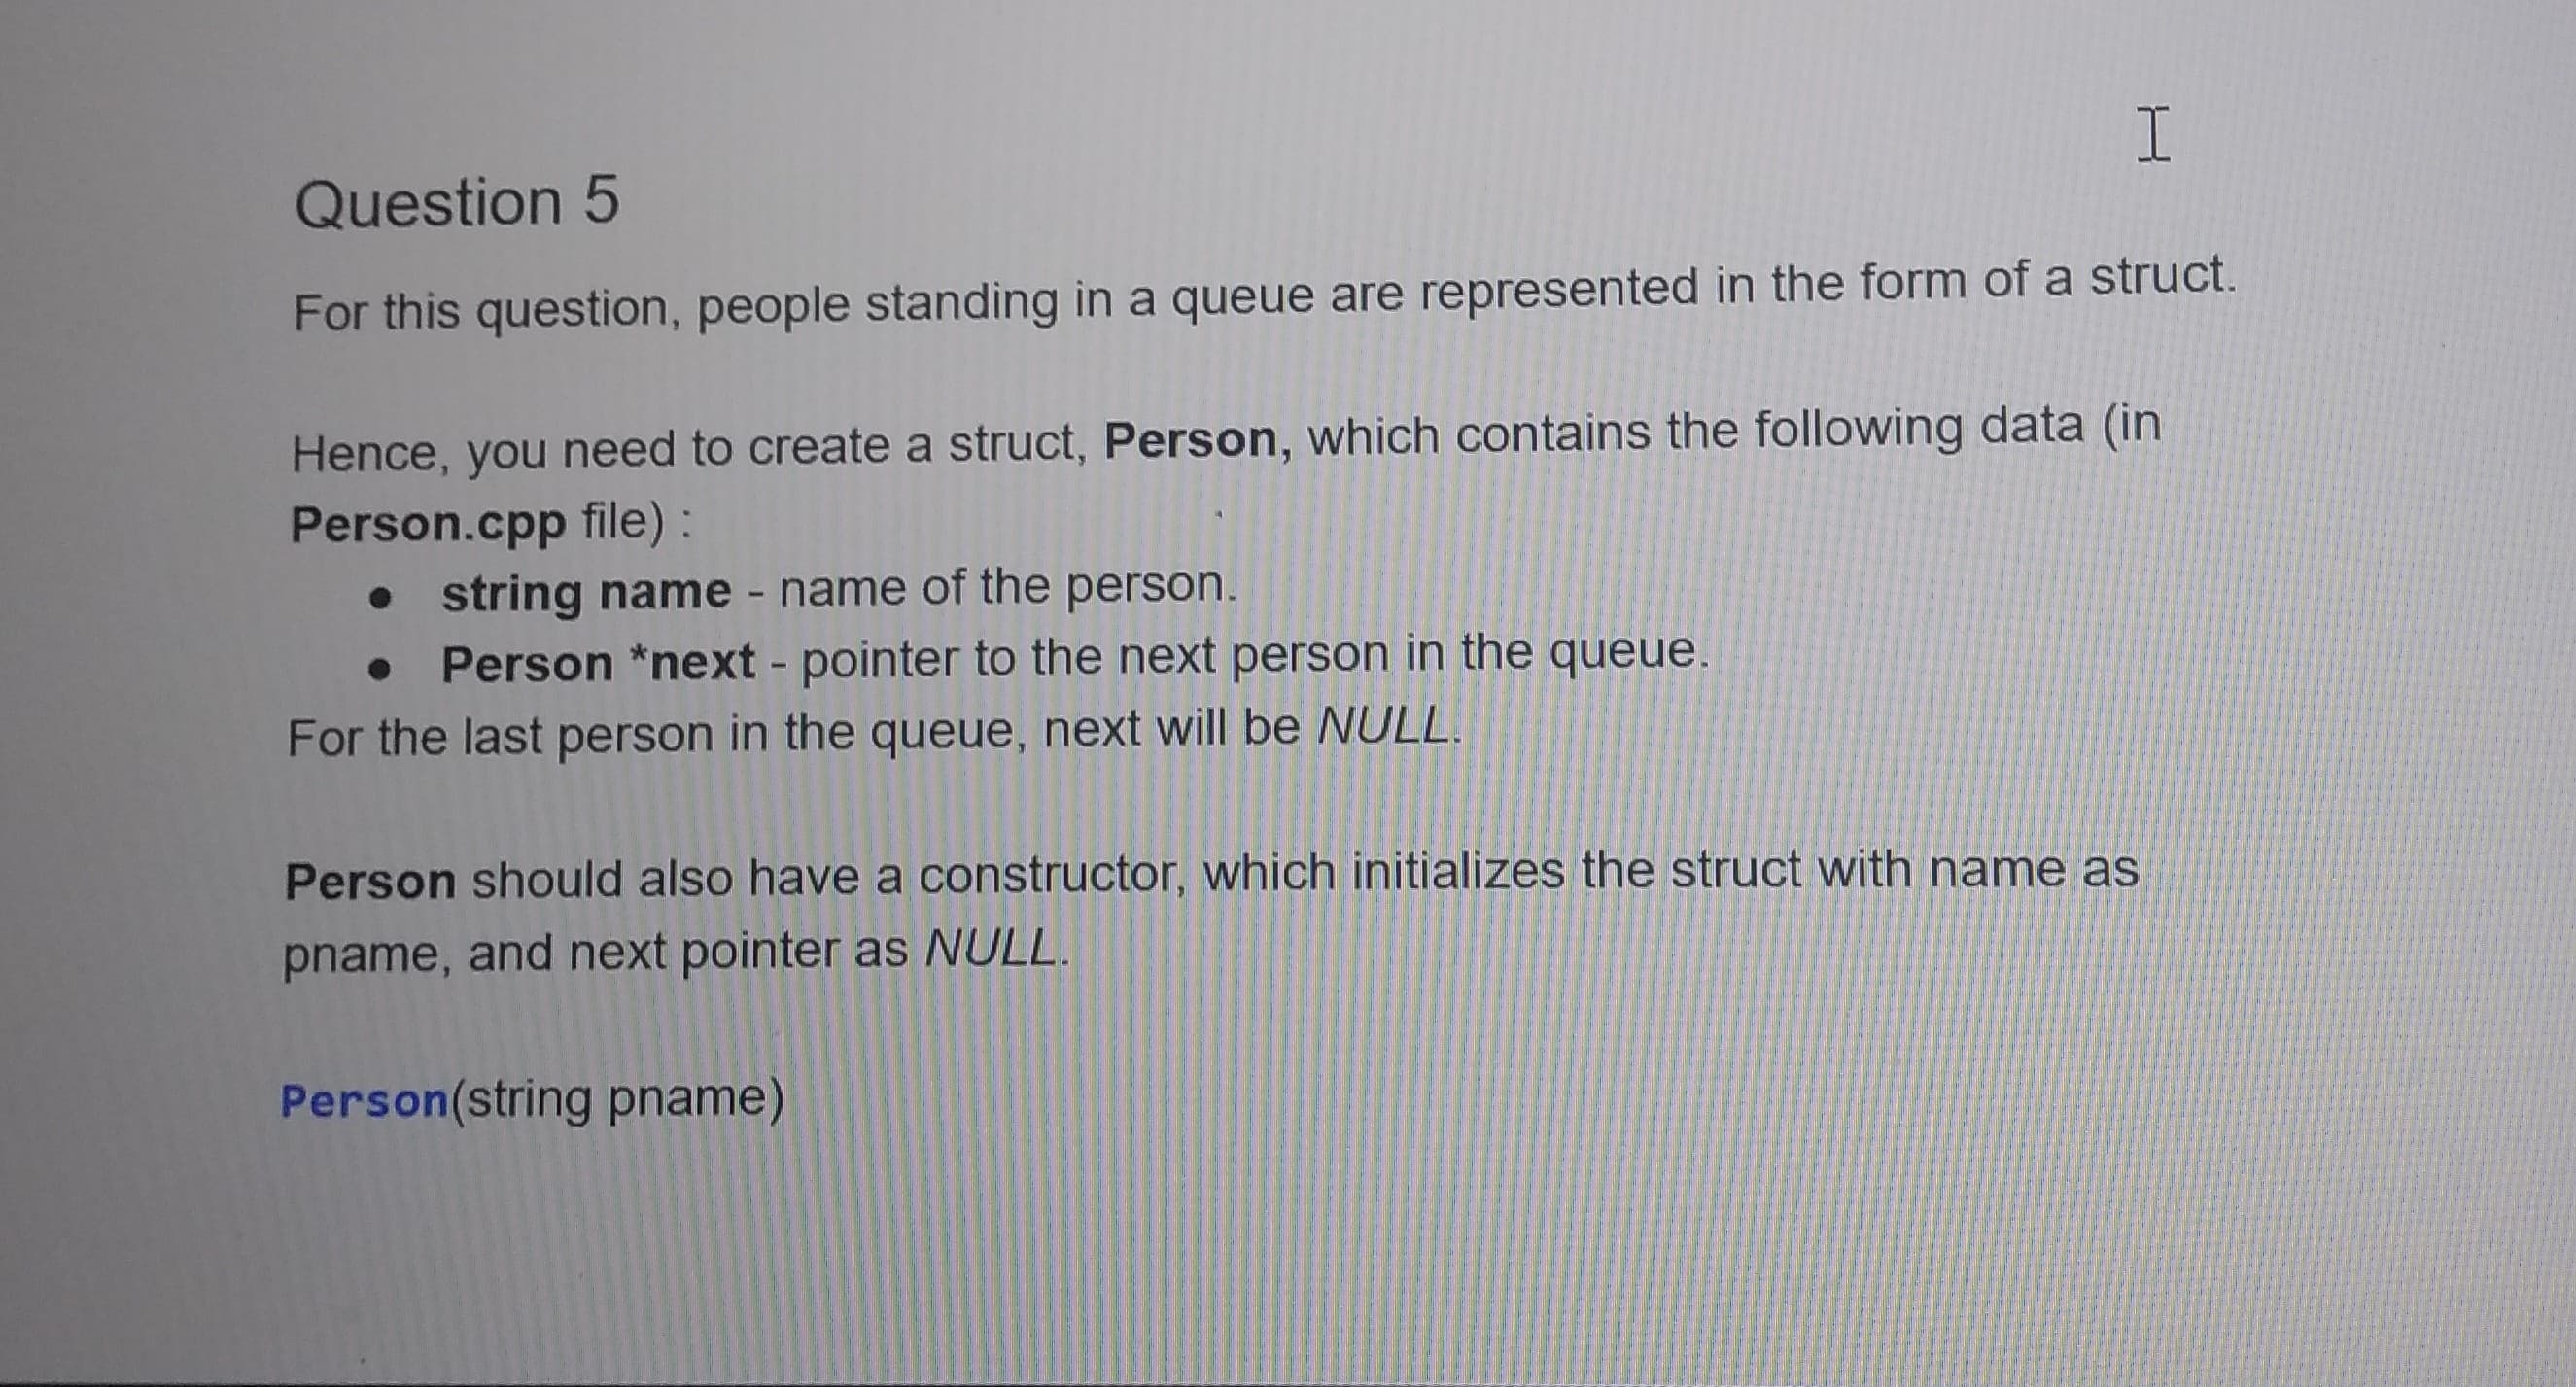 For this question, people standing in a queue are represented in the form of a struct.
Hence, you need to create a struct, Person, which contains the following data (in
Person.cpp file) :
• string name - name of the person.
Person *next - pointer to the next person in the queue.
For the last person in the queue, next will be NULL.
Person should also have a constructor, which initializes the struct with name as
pname, and next pointer as NULL.
Person(string pname)
